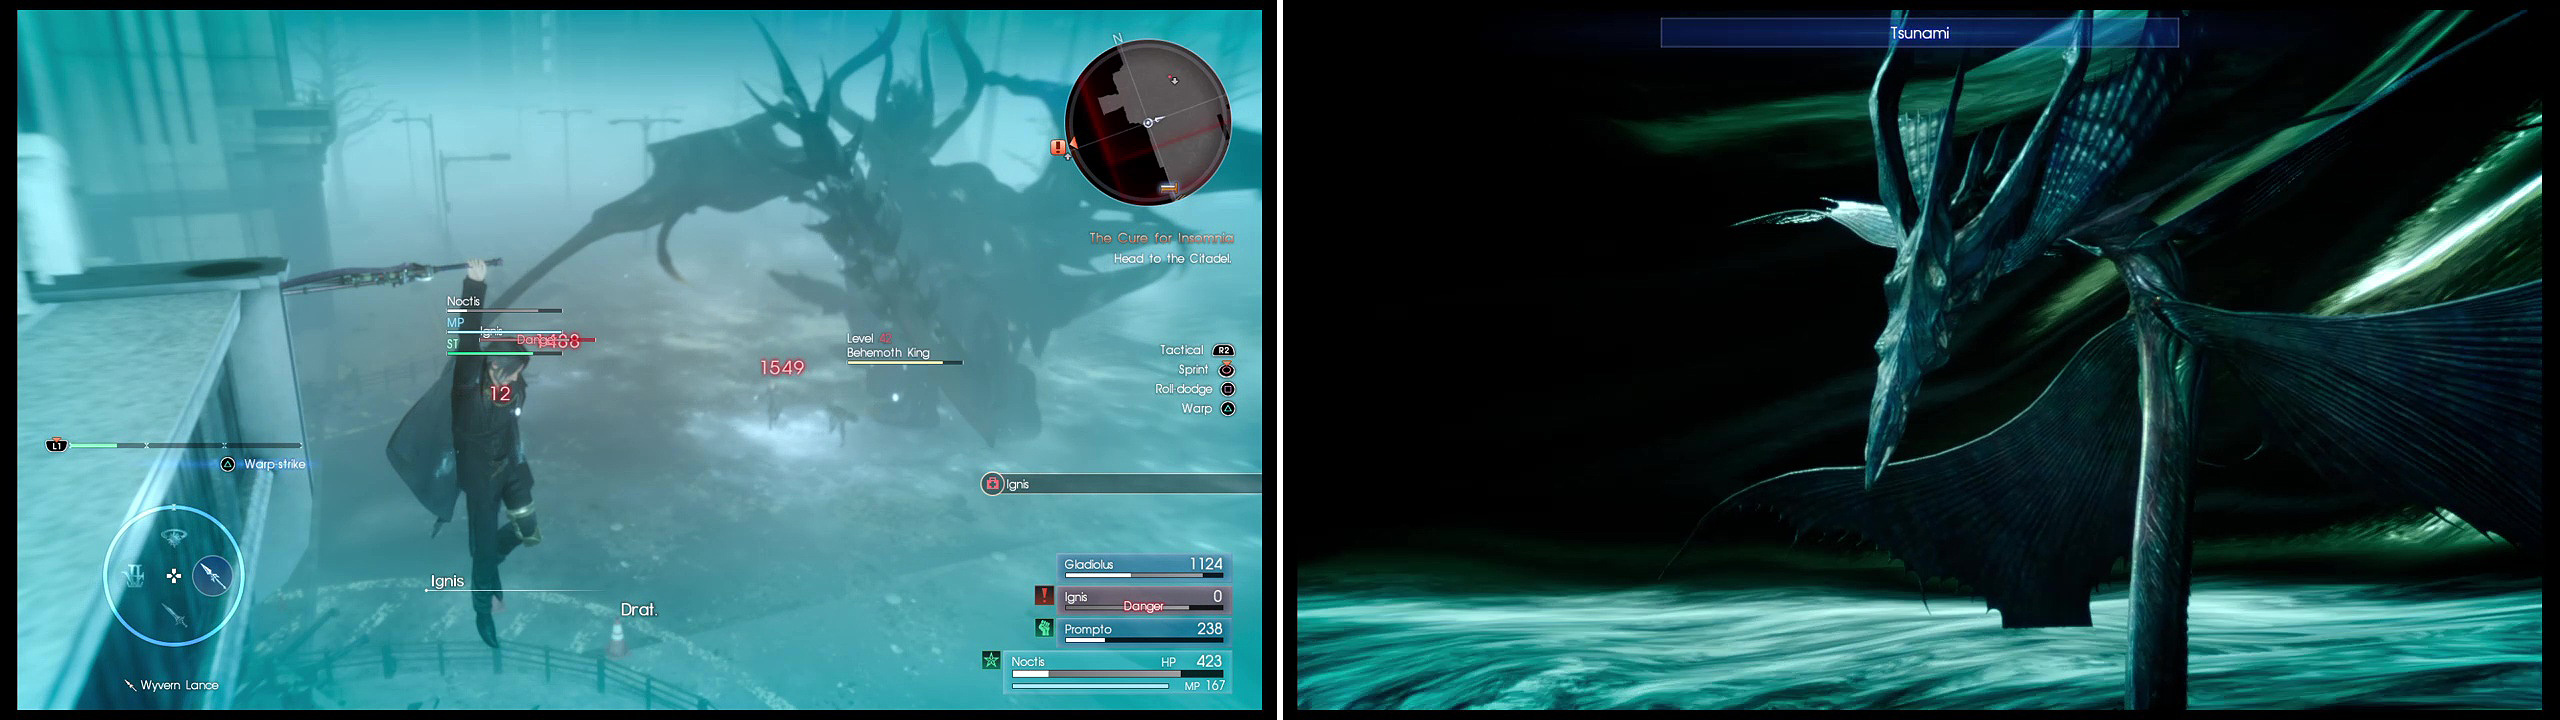 When Behemoth King freezes the arena, Point-warp (left) away. If you get lucky, a summon may arrive to help you (right).